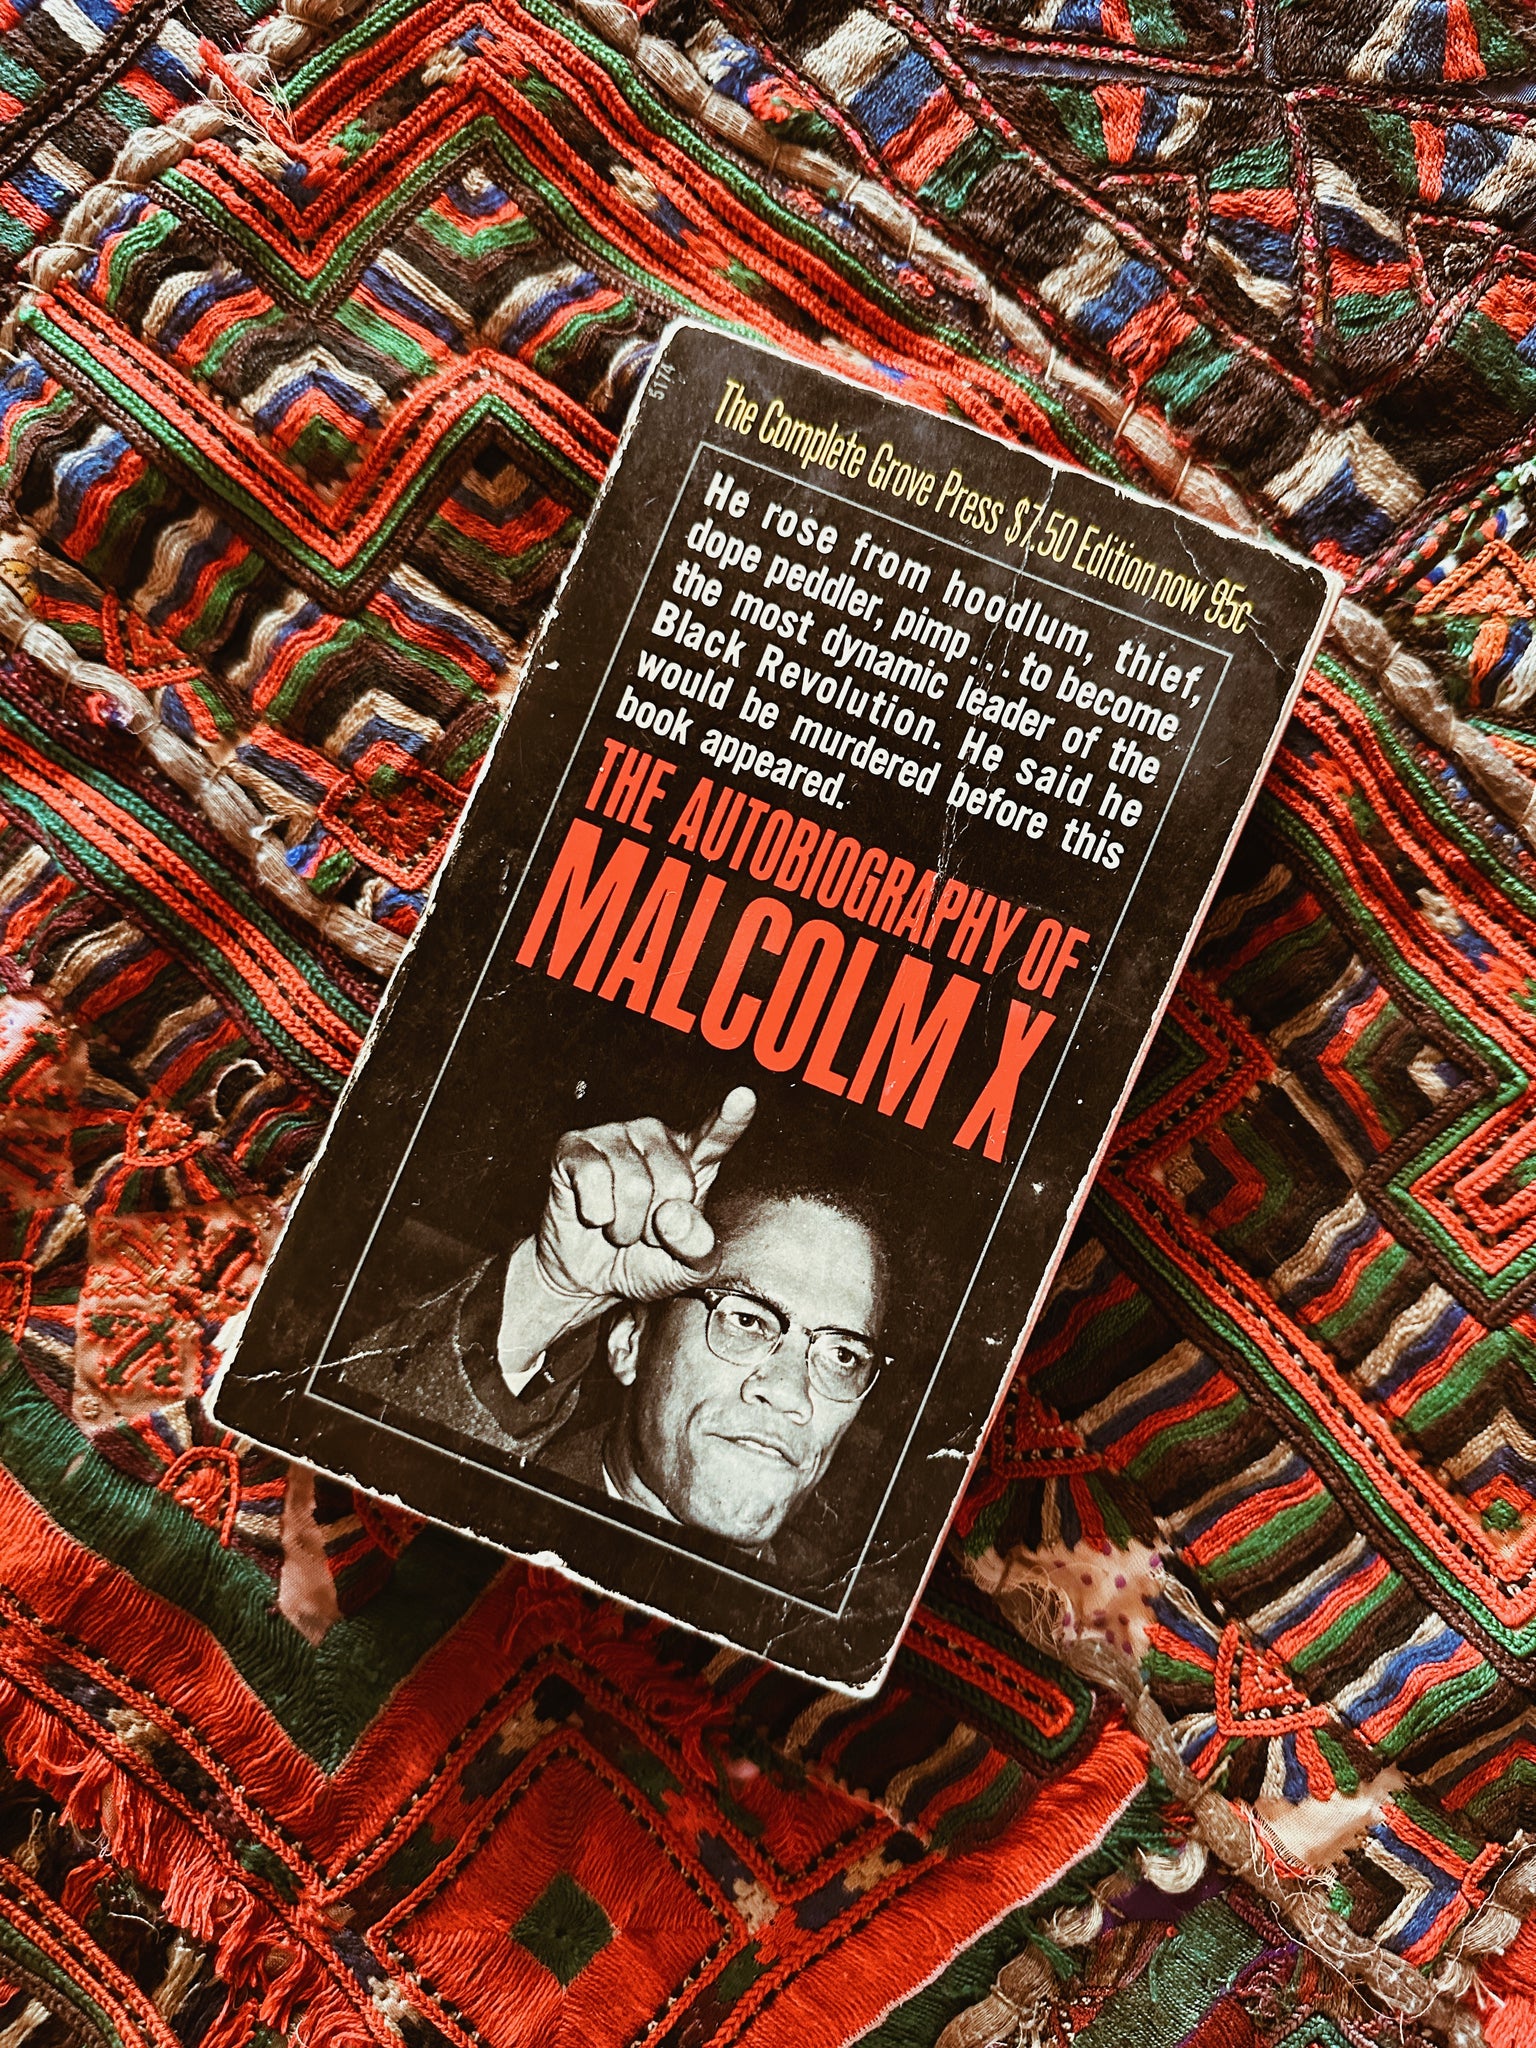 Vintage Softcover “The Autobiography of Malcolm X” (1966)